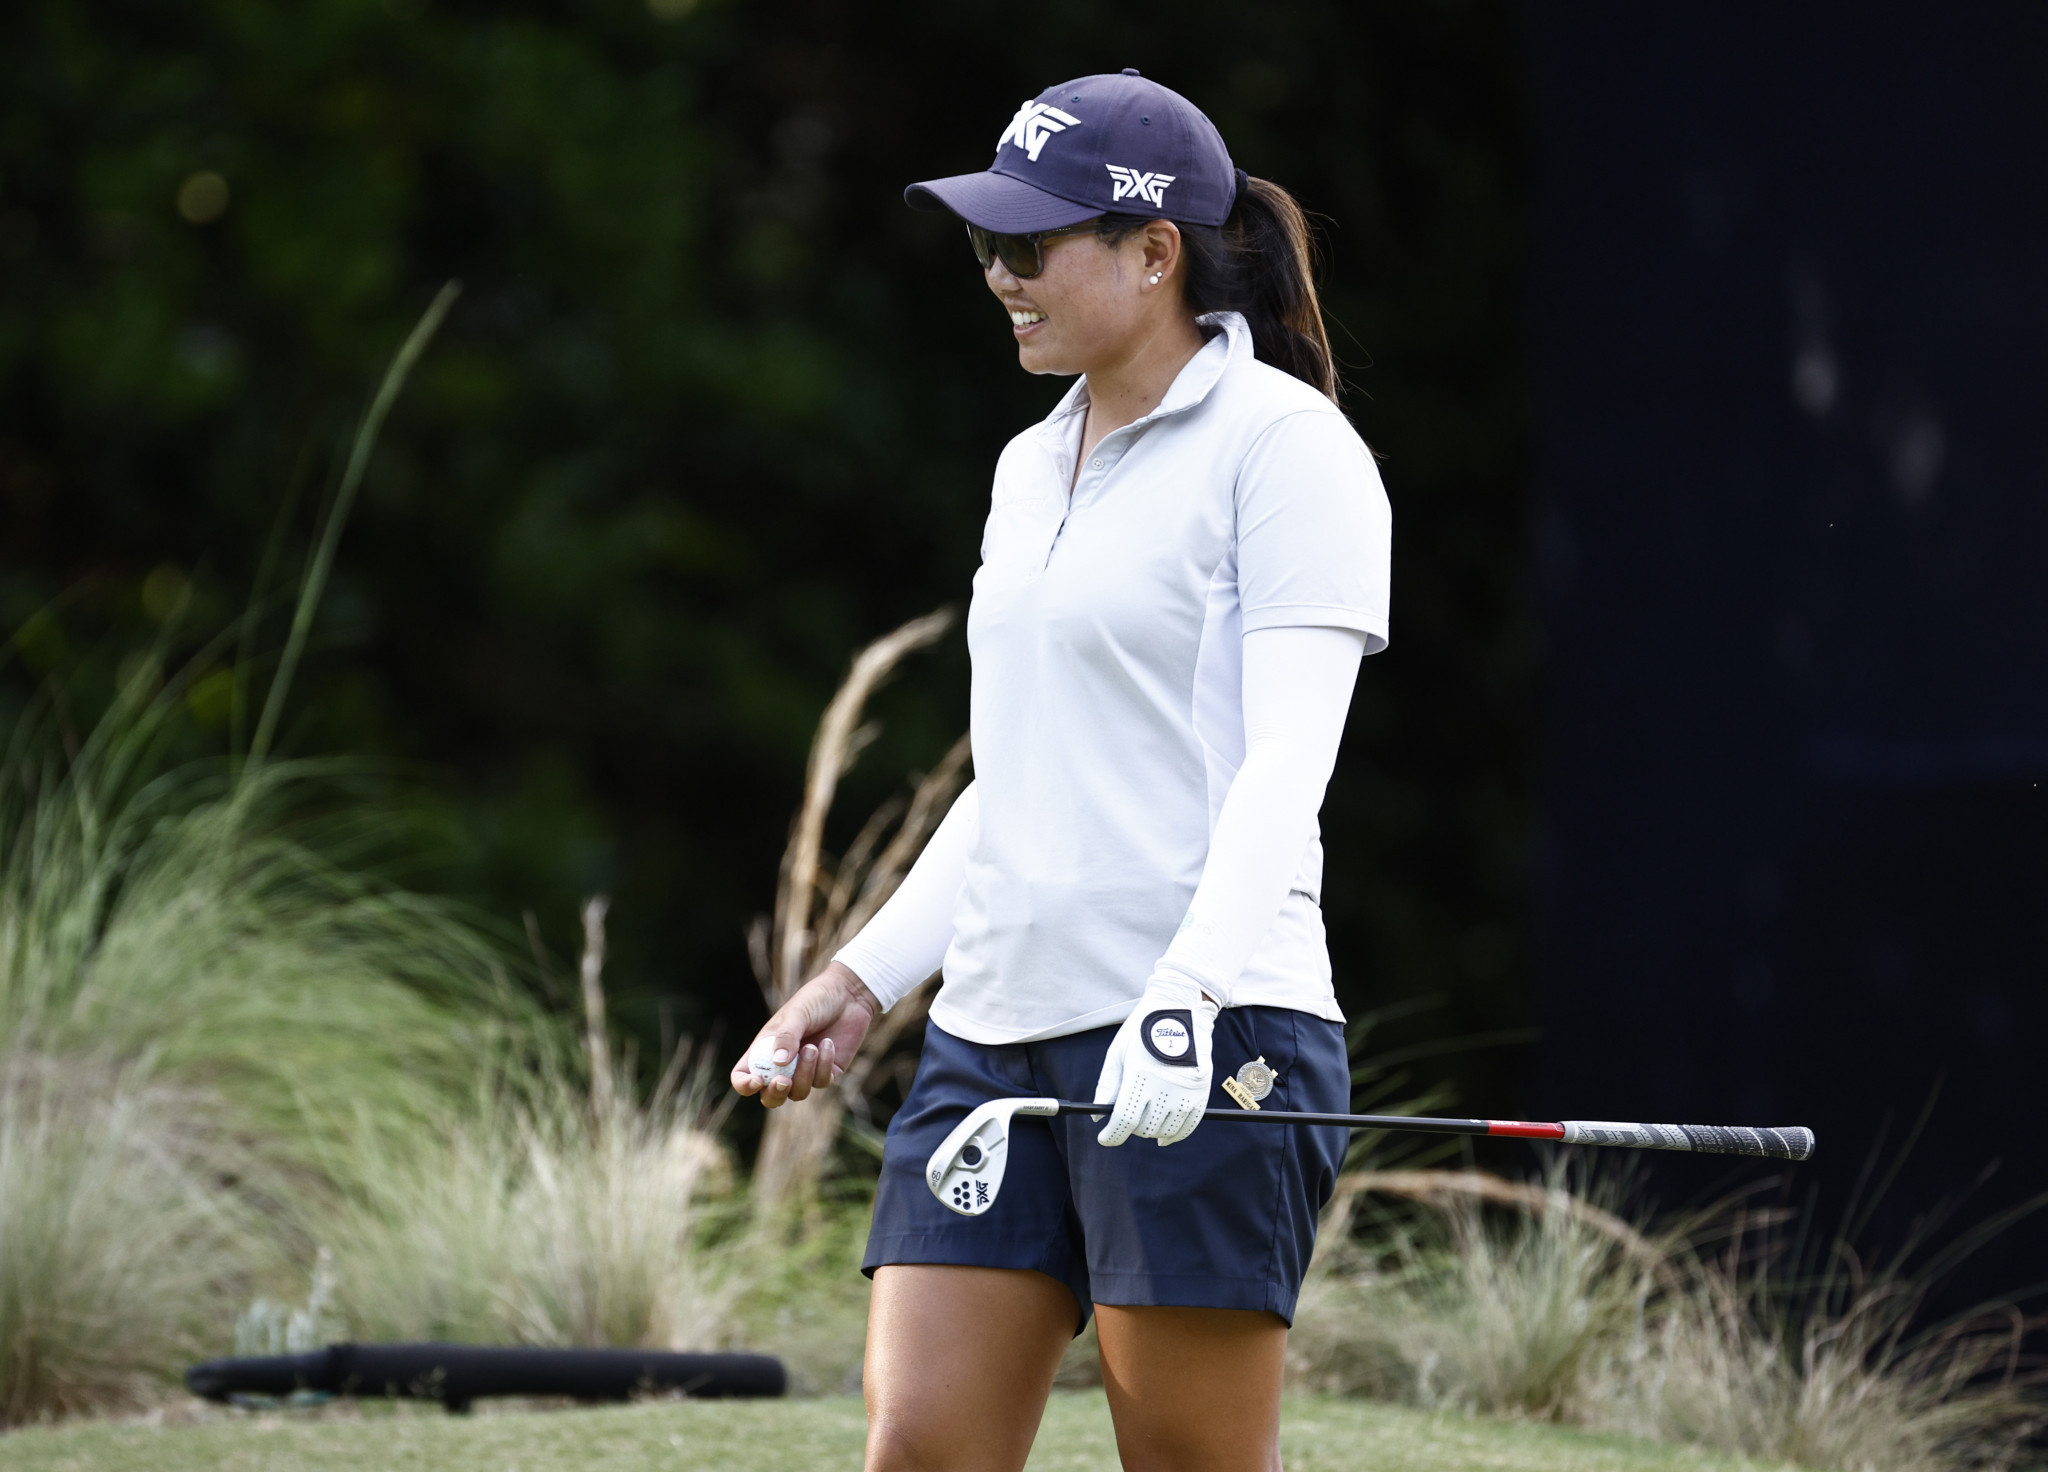 Harigae leads US Women's Open after day one at Pine Needles